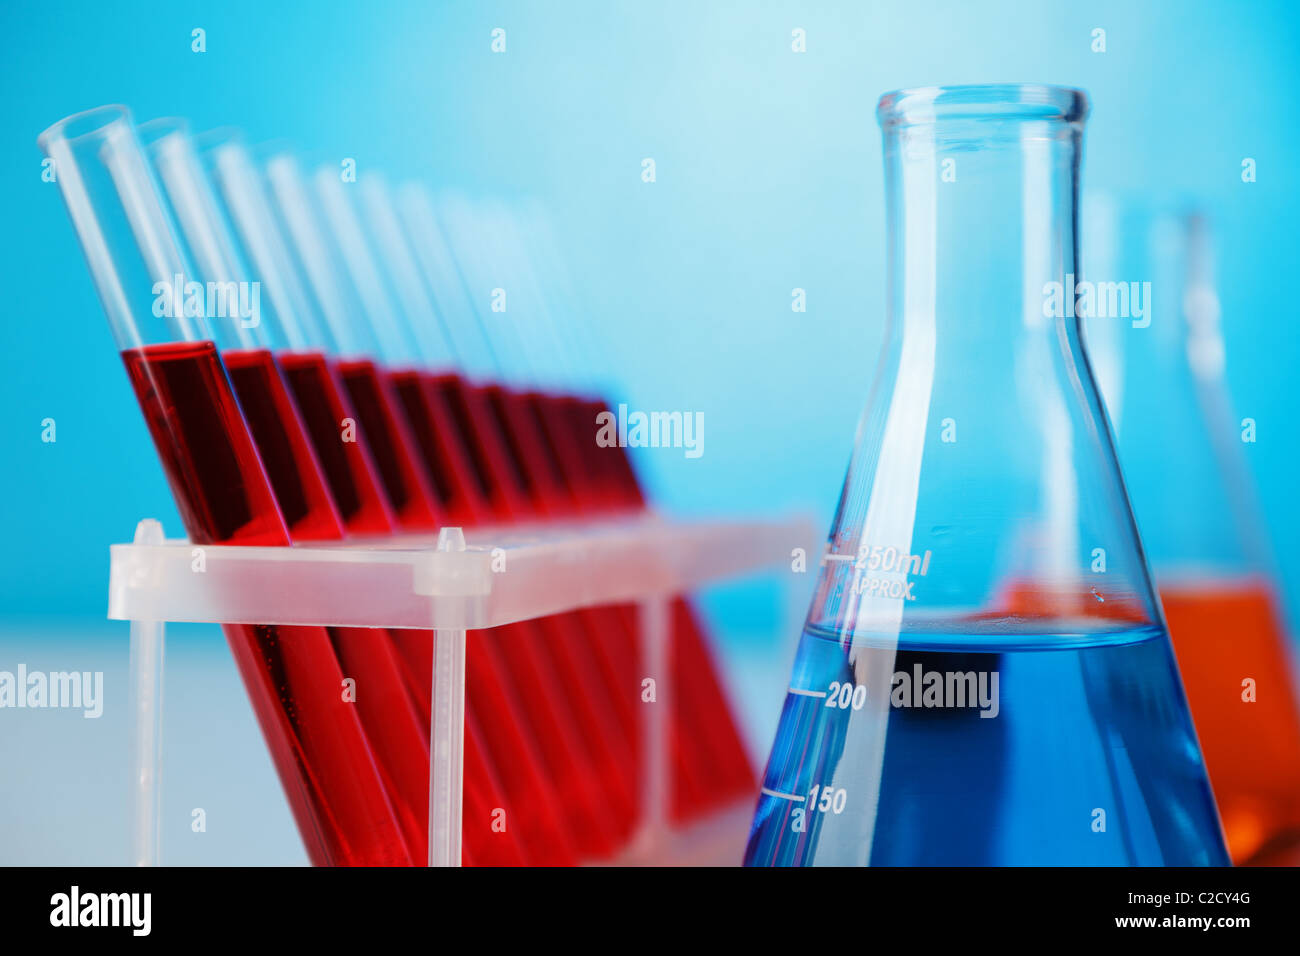 Abstract laboratory glassware equipment over blue background Stock Photo